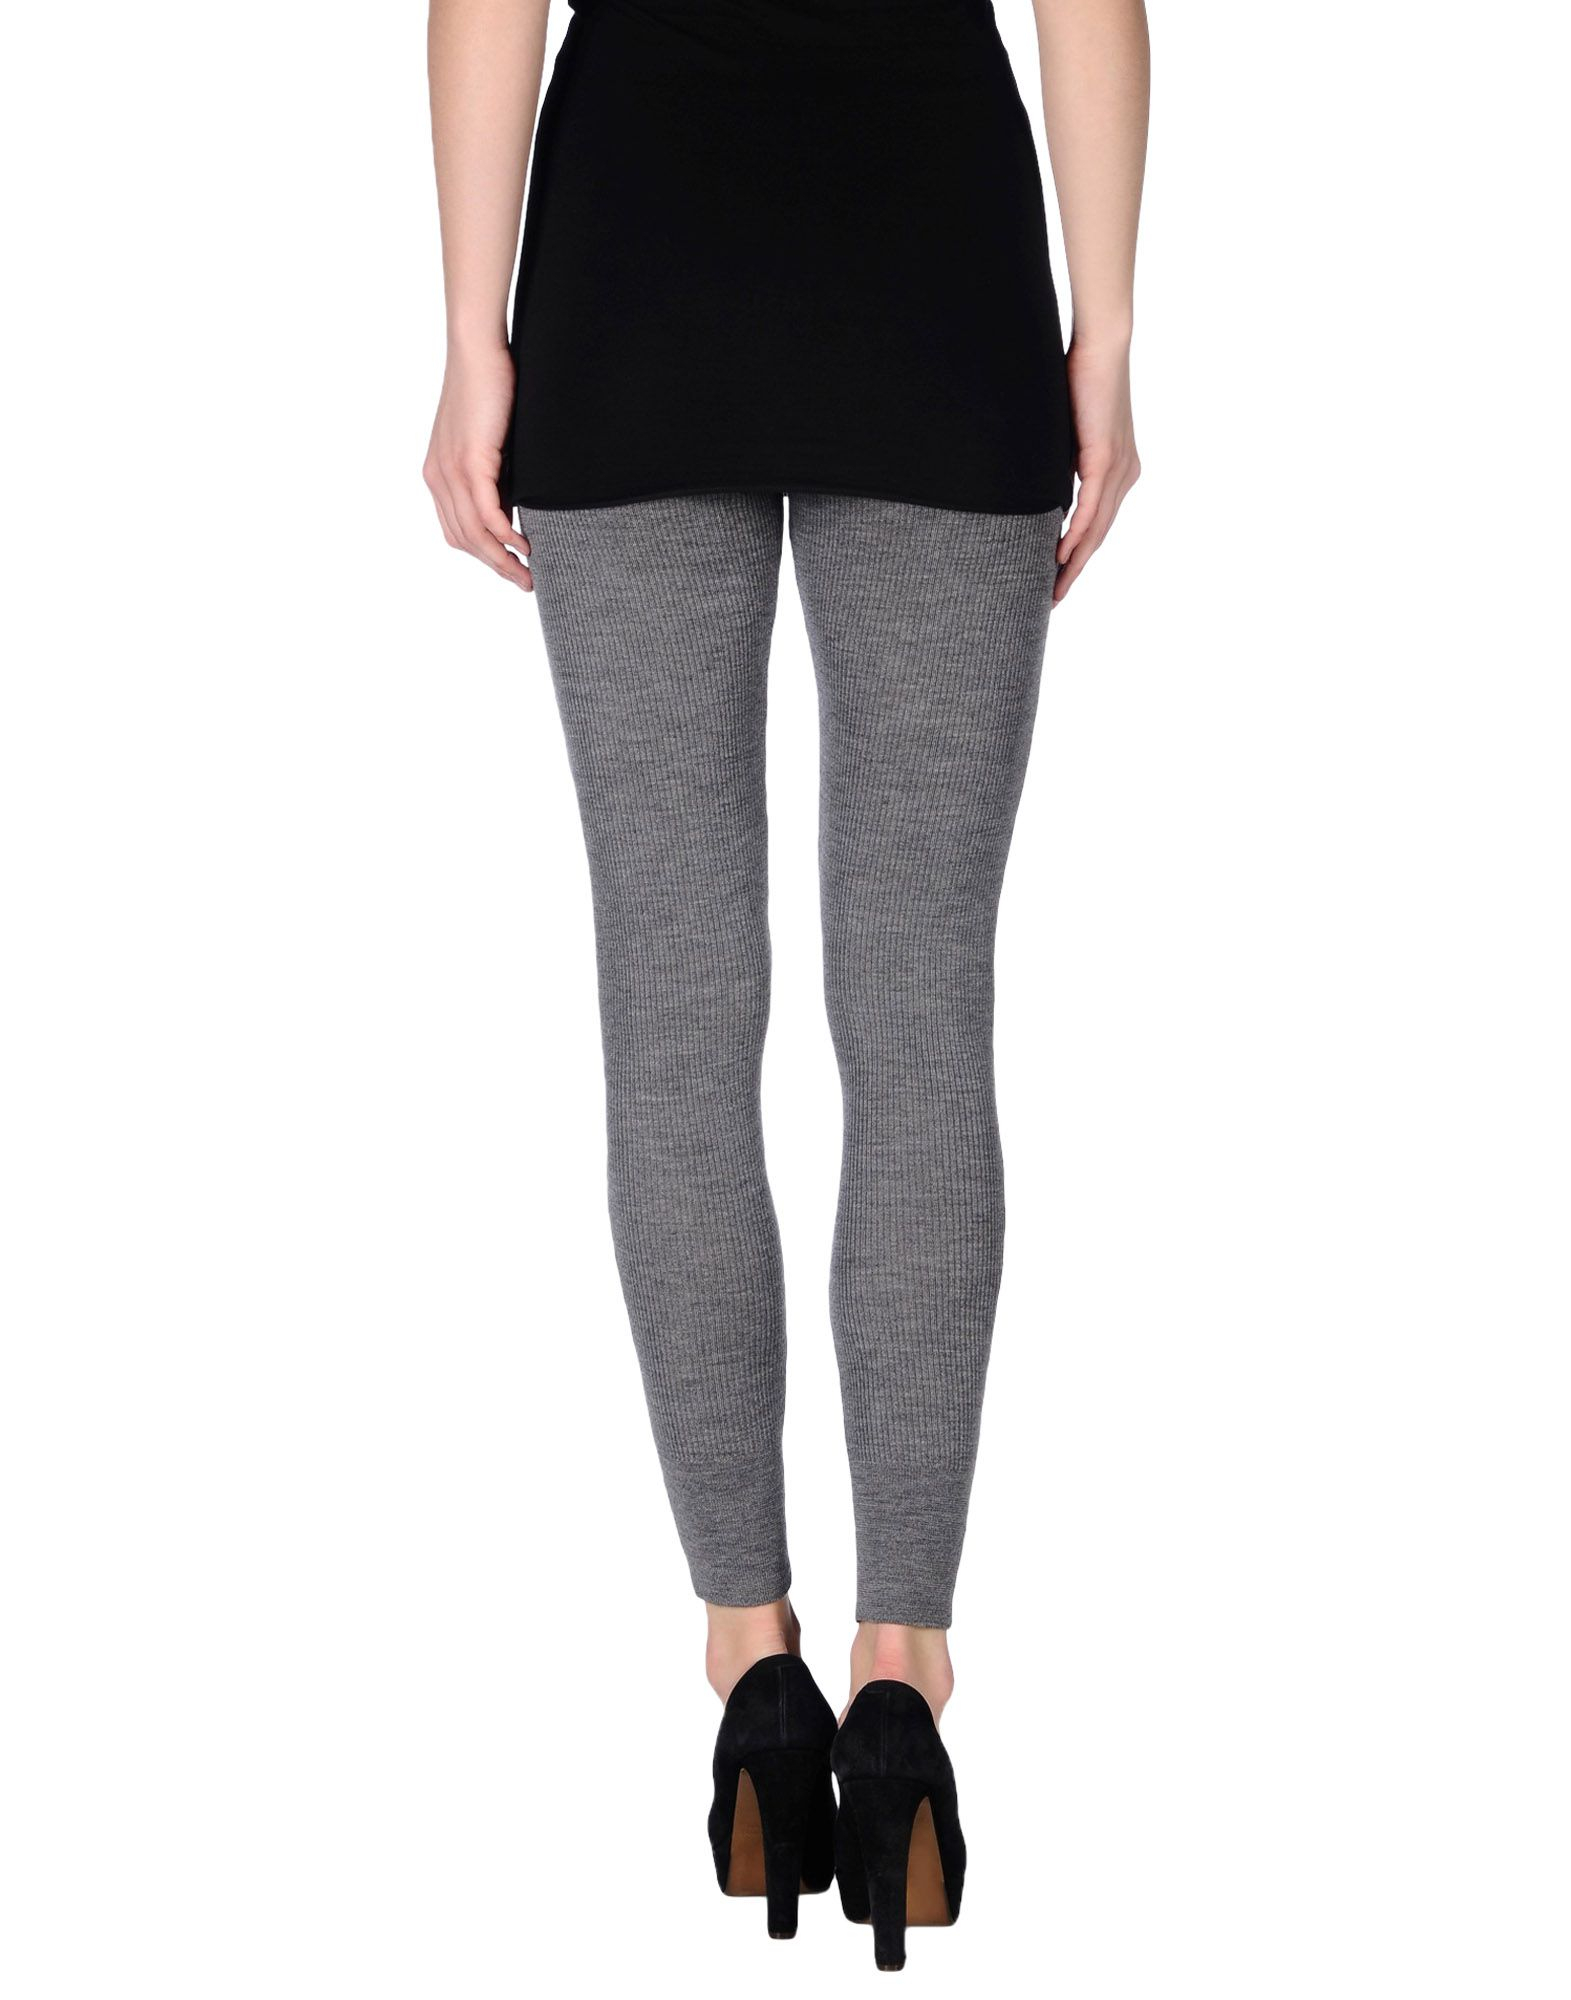 Women's High-Waisted Leggings - Wild Fable™ Charcoal Gray M